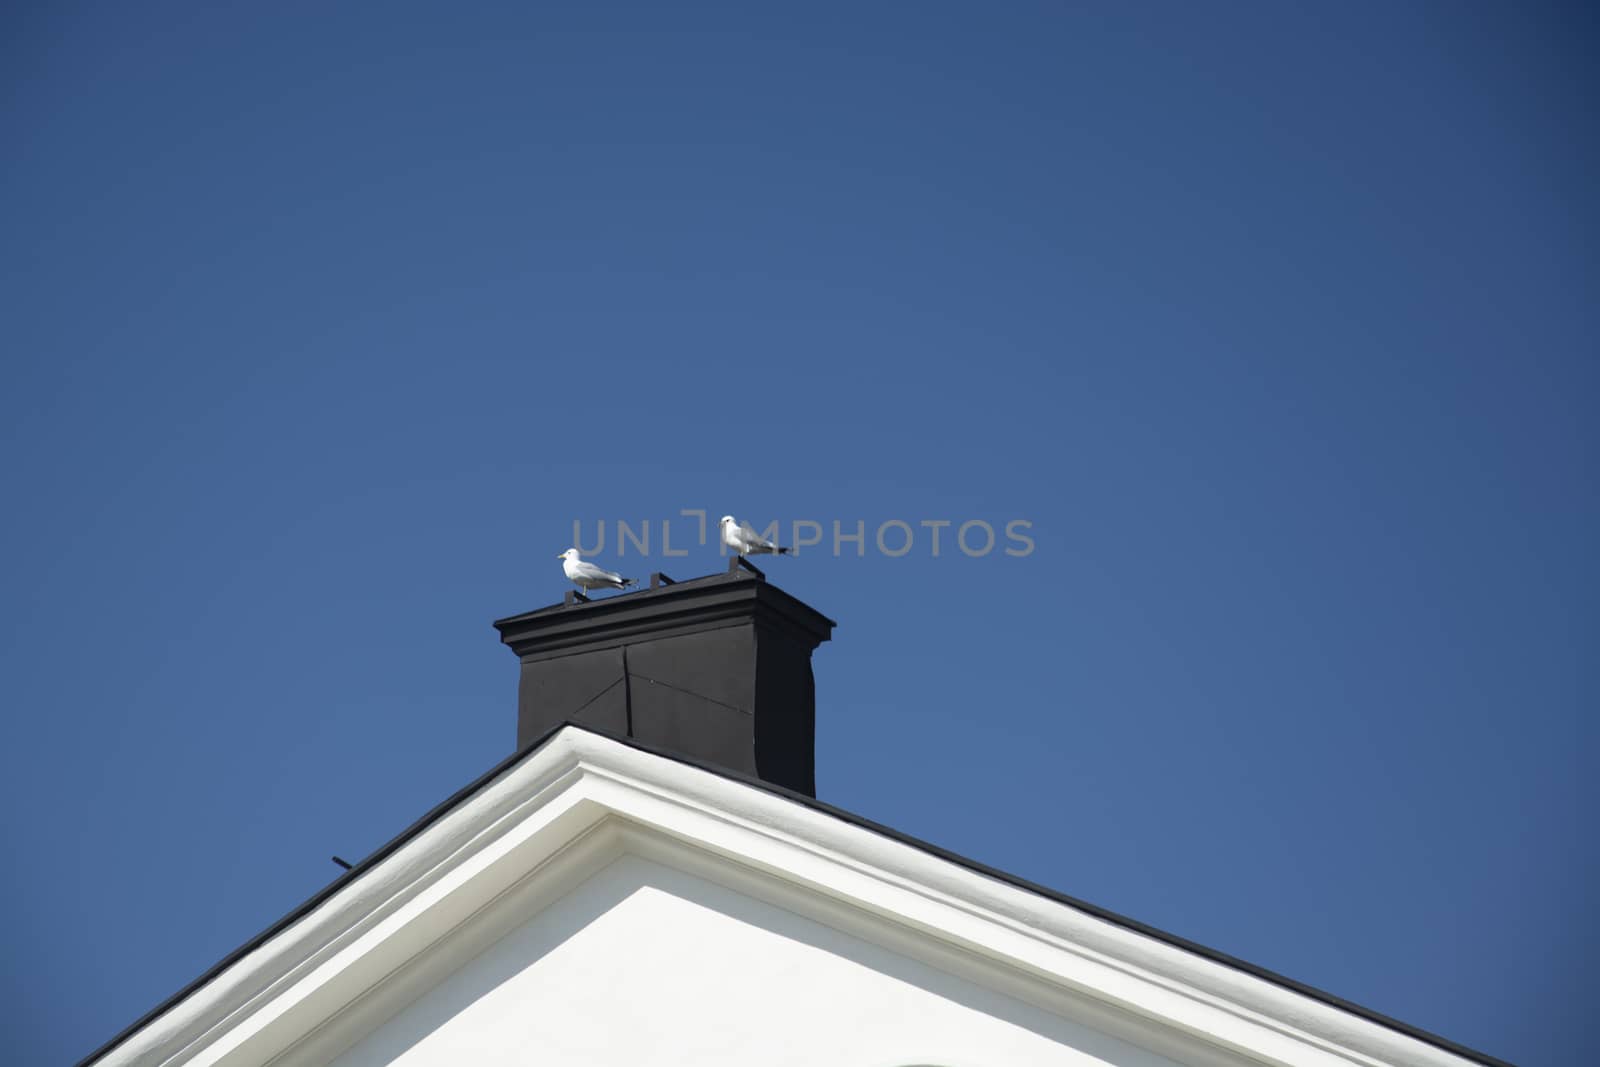 Two seagulls sitting on a chimney rooftop against blue sky on a sunny spring day in Stockholm, Sweden.